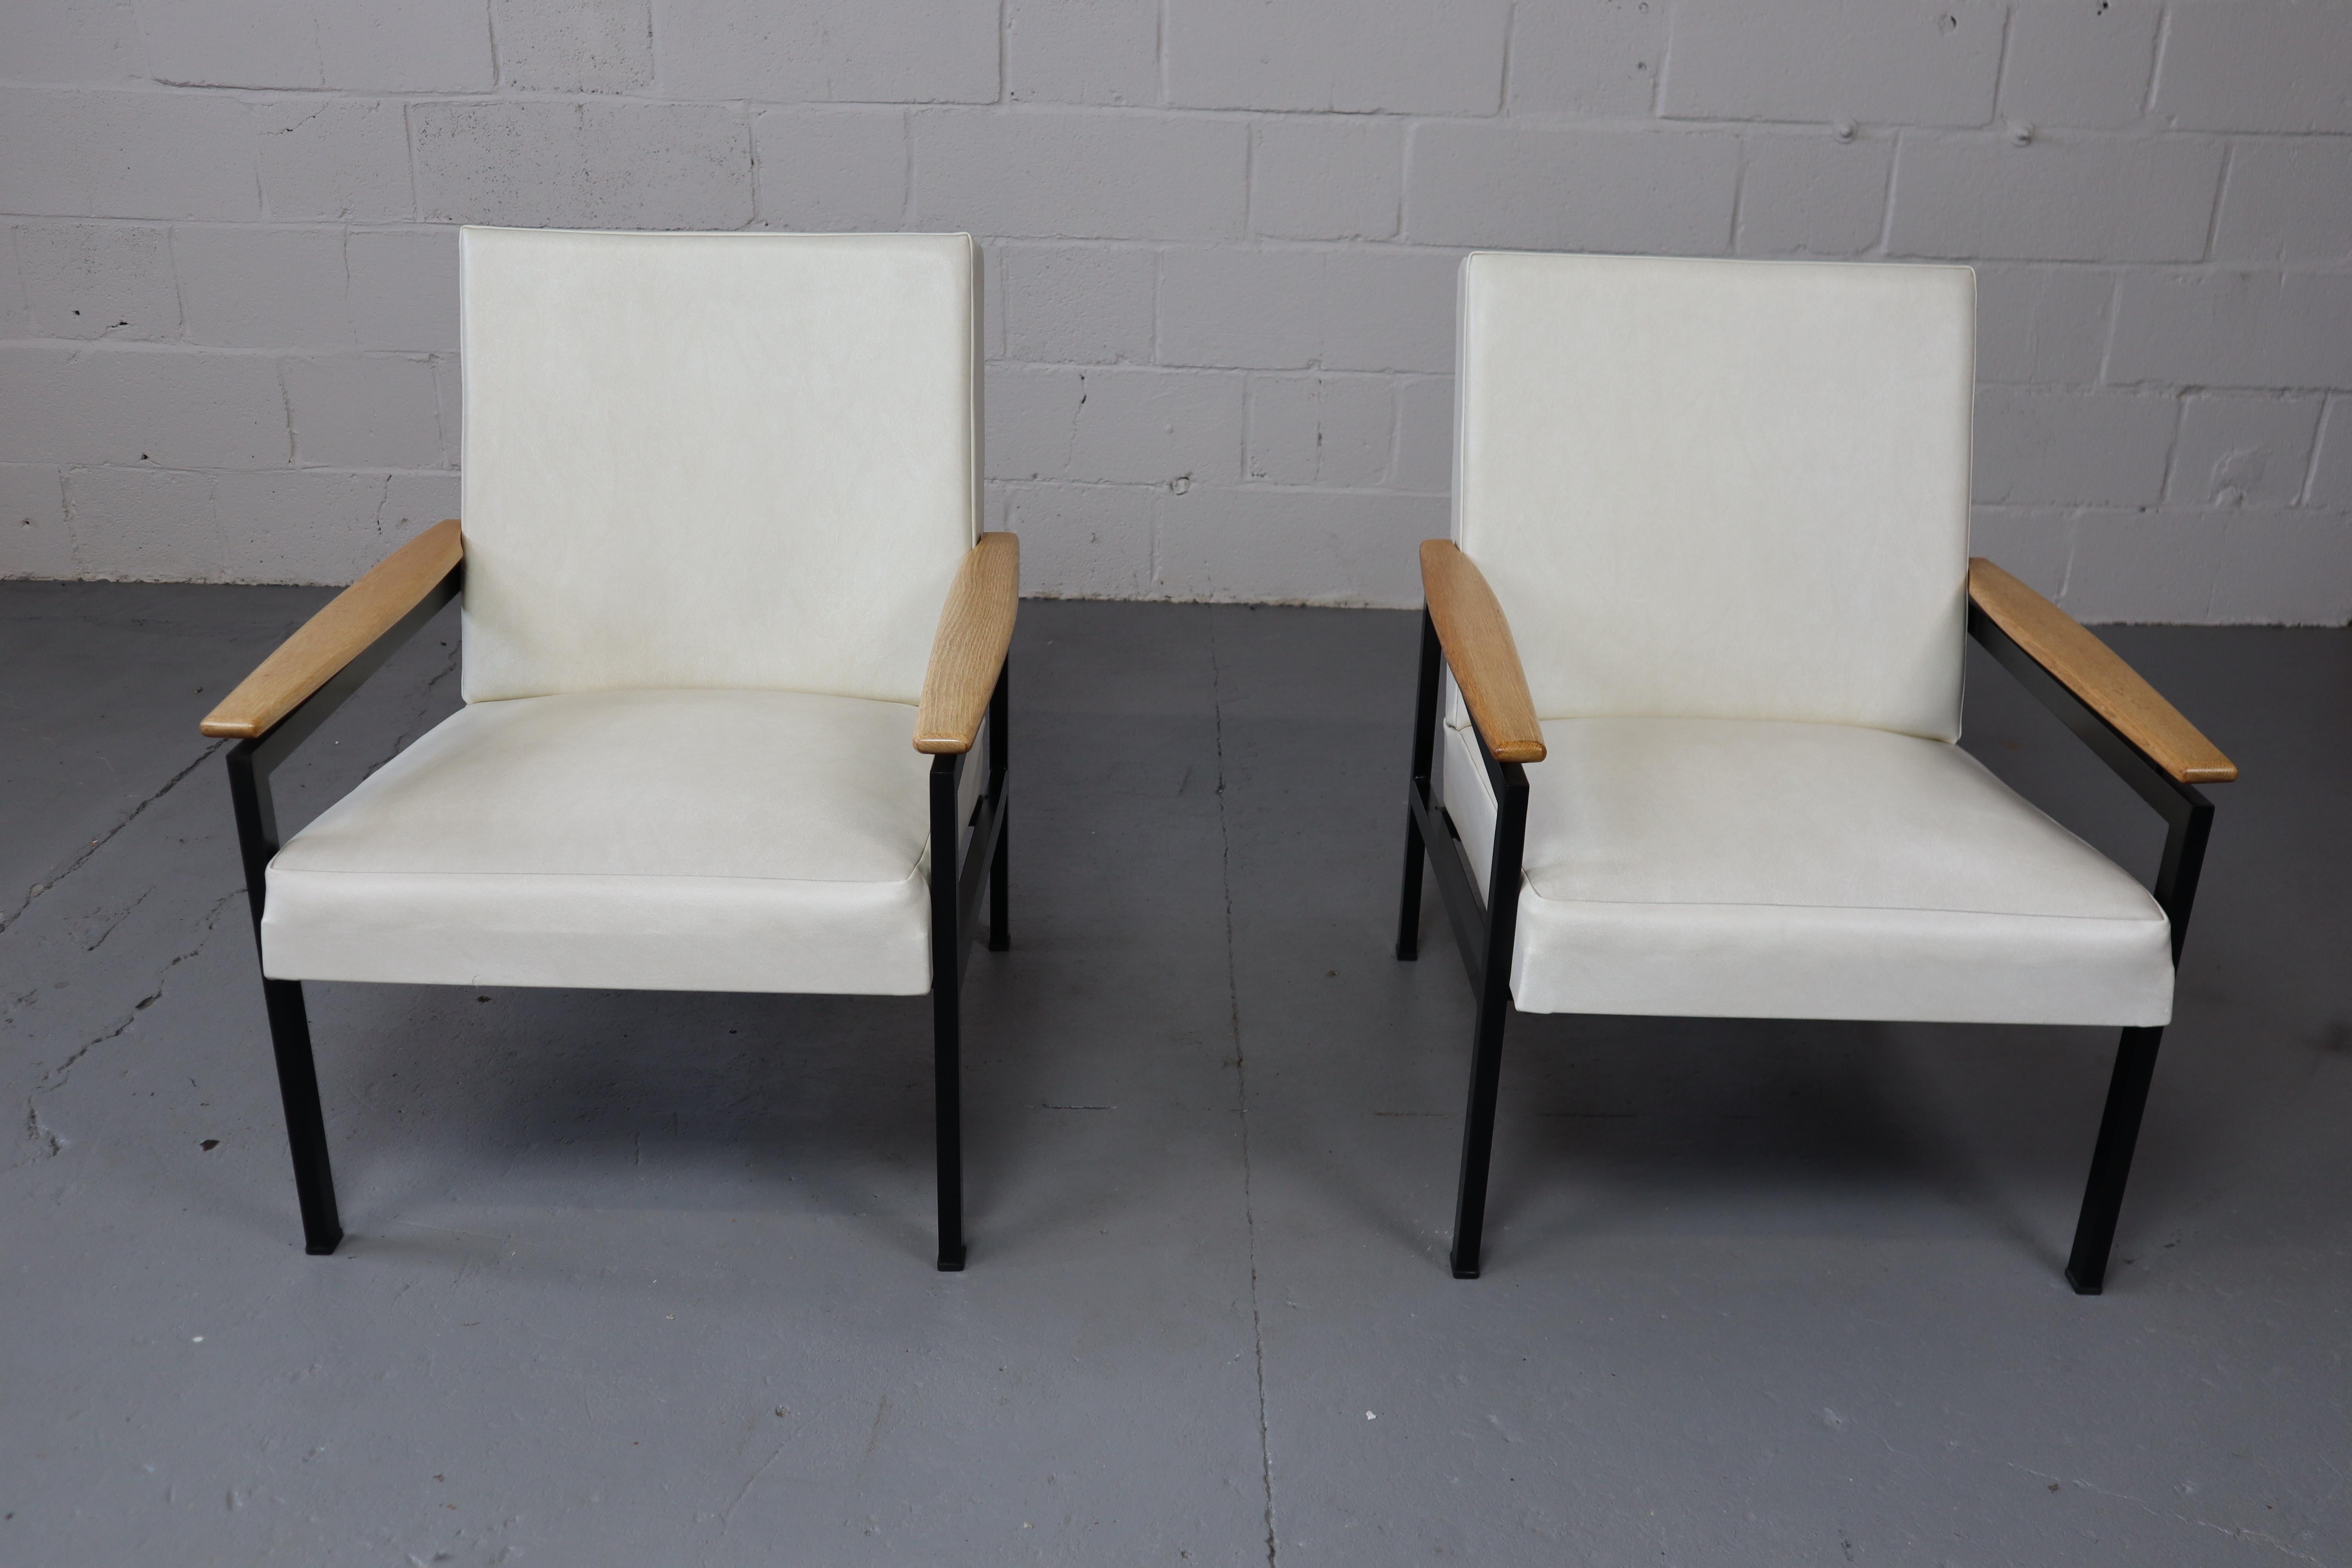 Pair of vintage easy armchairs.
Original leatherette upholstery with black metal base and oak armrests.
Presumably Dutch design in the style of Gijs Van der Sluis, Rob Parry, Martin Visser, Kho Liang Ie...
Dxhxl: 80x80x63 CM